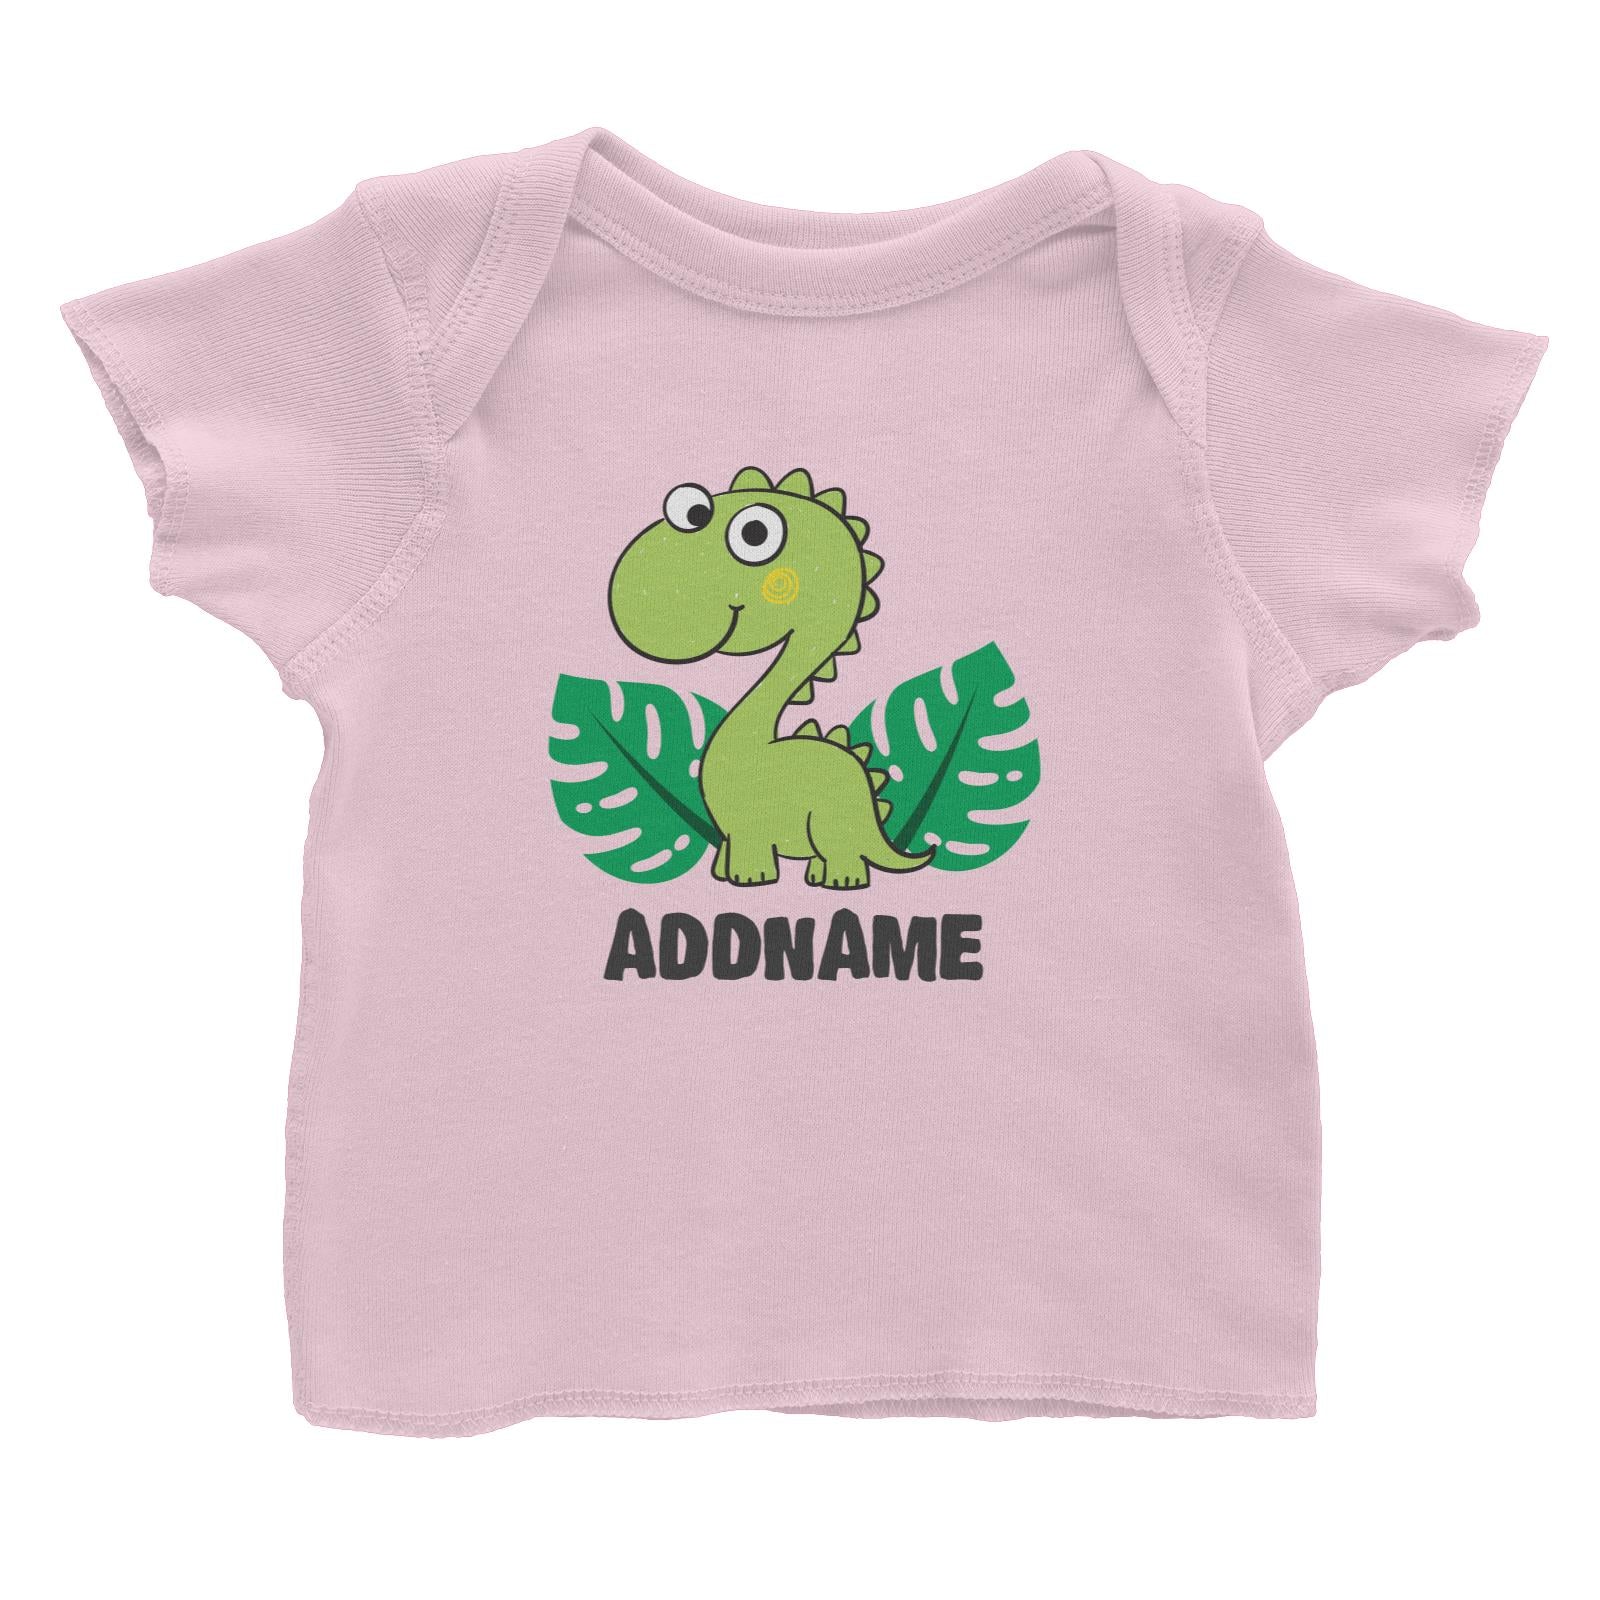 Super Cute Dinosaur With Green Leaves Baby T-Shirt